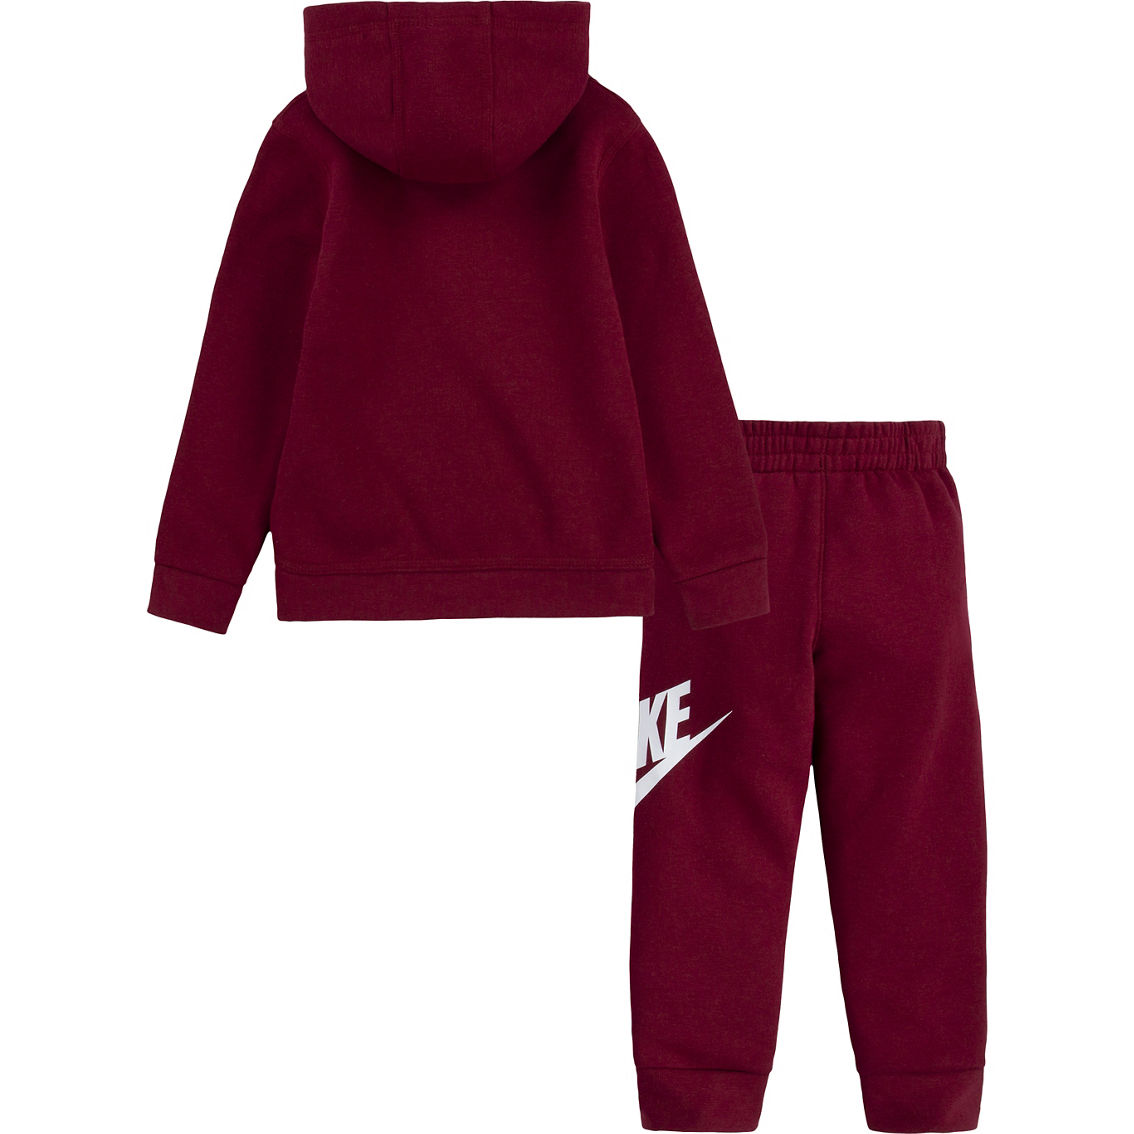 Nike Toddler Boys Club Pullover and Joggers 2 pc. Set - Image 2 of 4